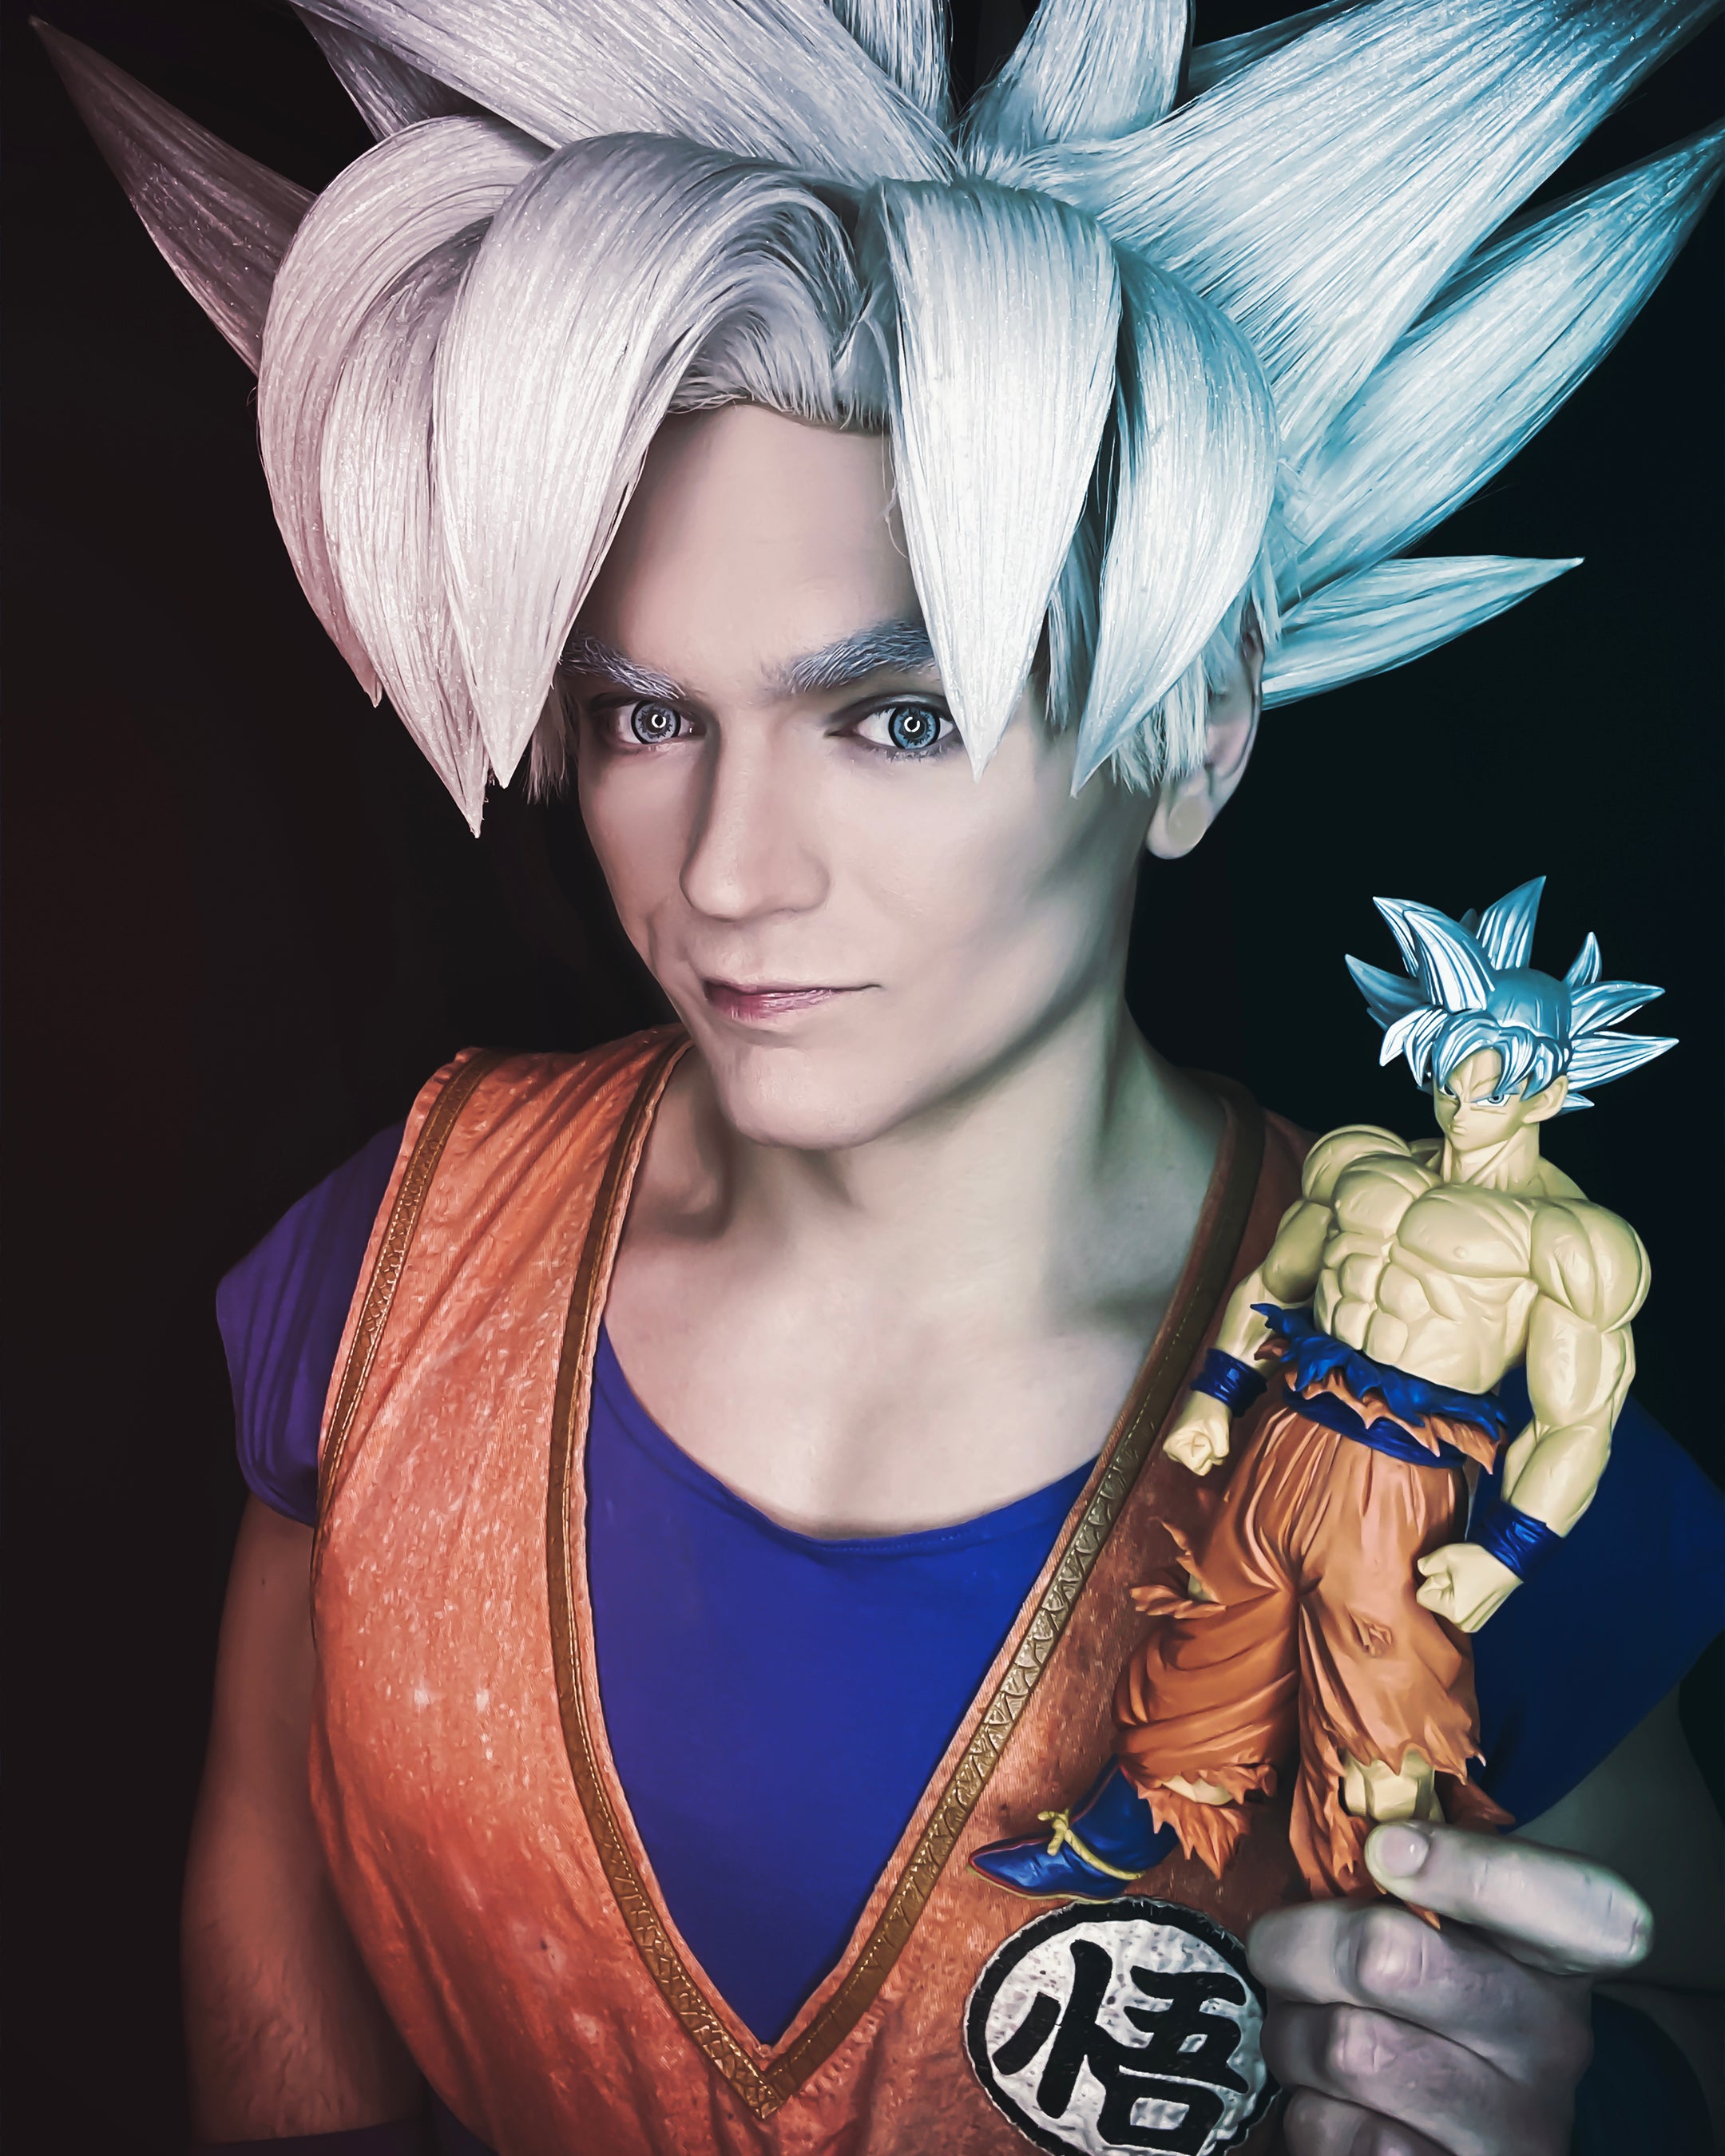 How This Cosplayer Used His Ultra Instinct Goku Cosplay As Motivation To Get Better